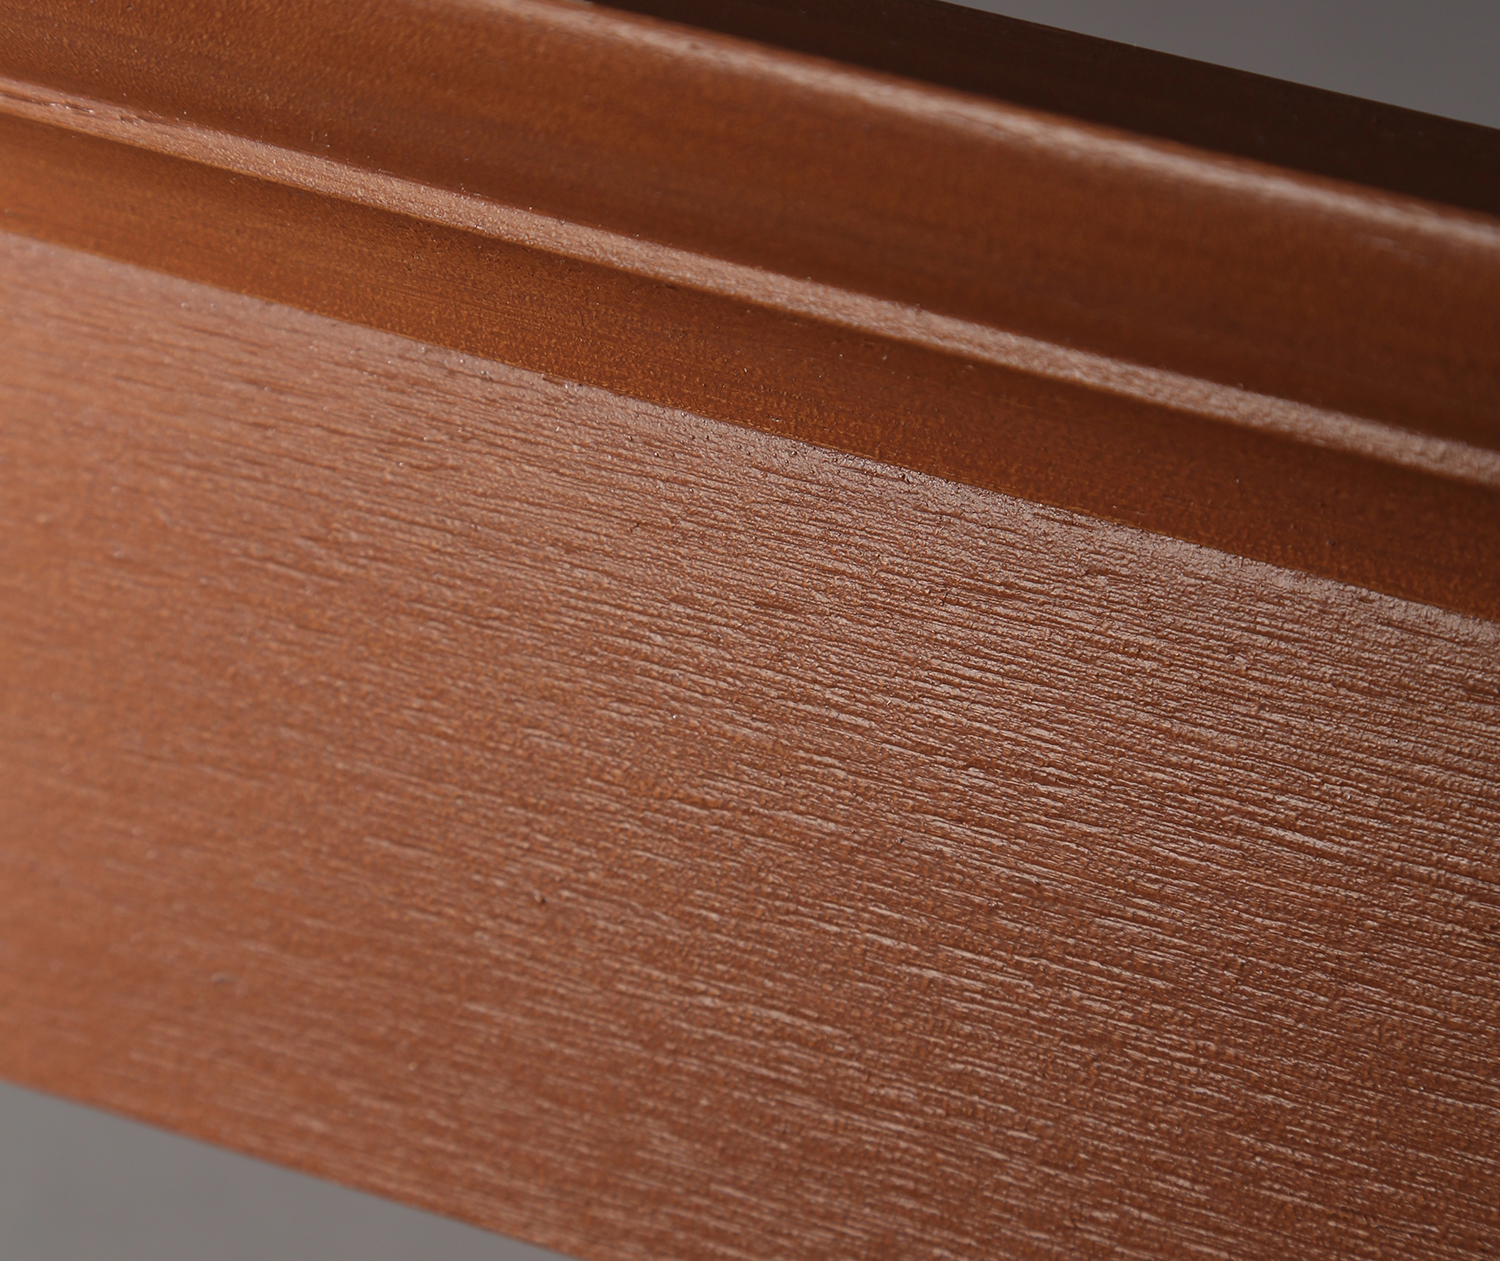 Fypon Classic Woodgrain moulding stained with natural oak.